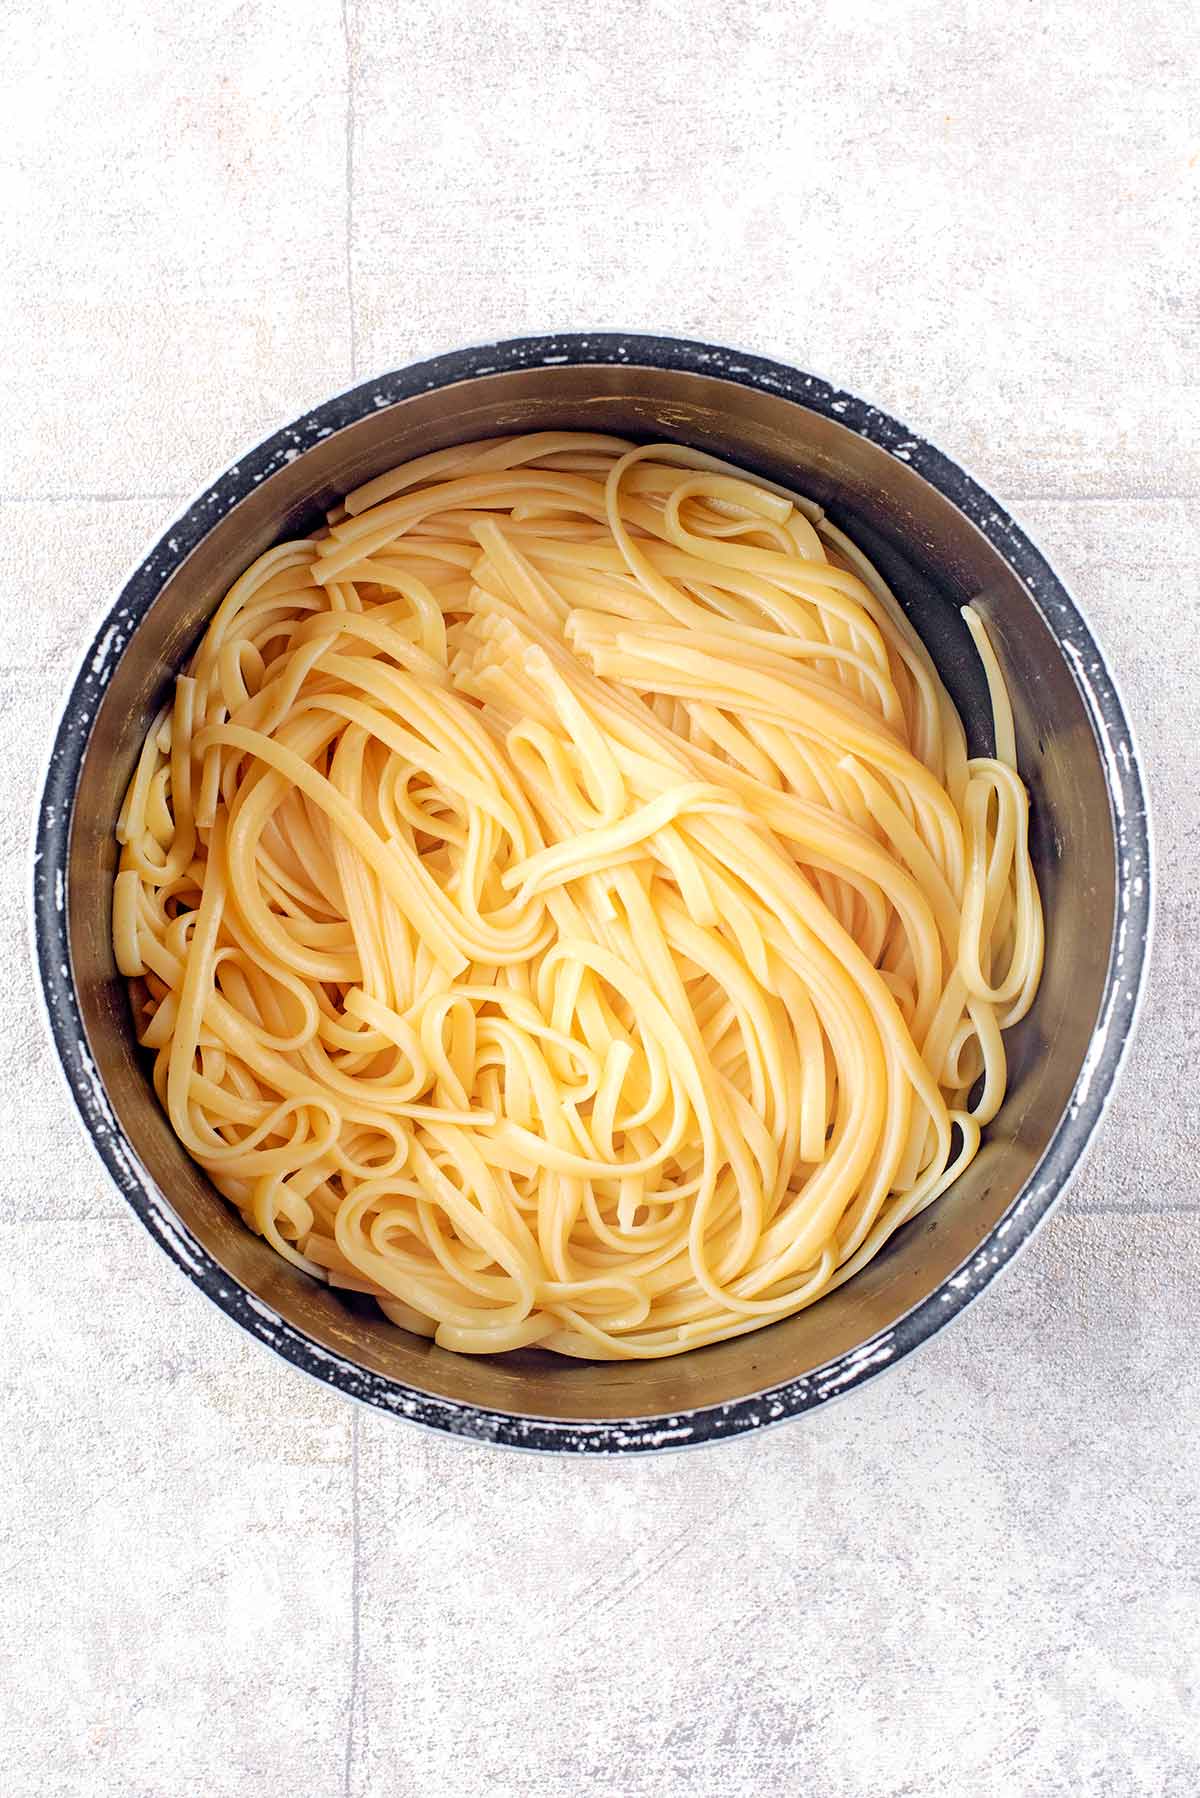 A saucepan full of cooked linguine.